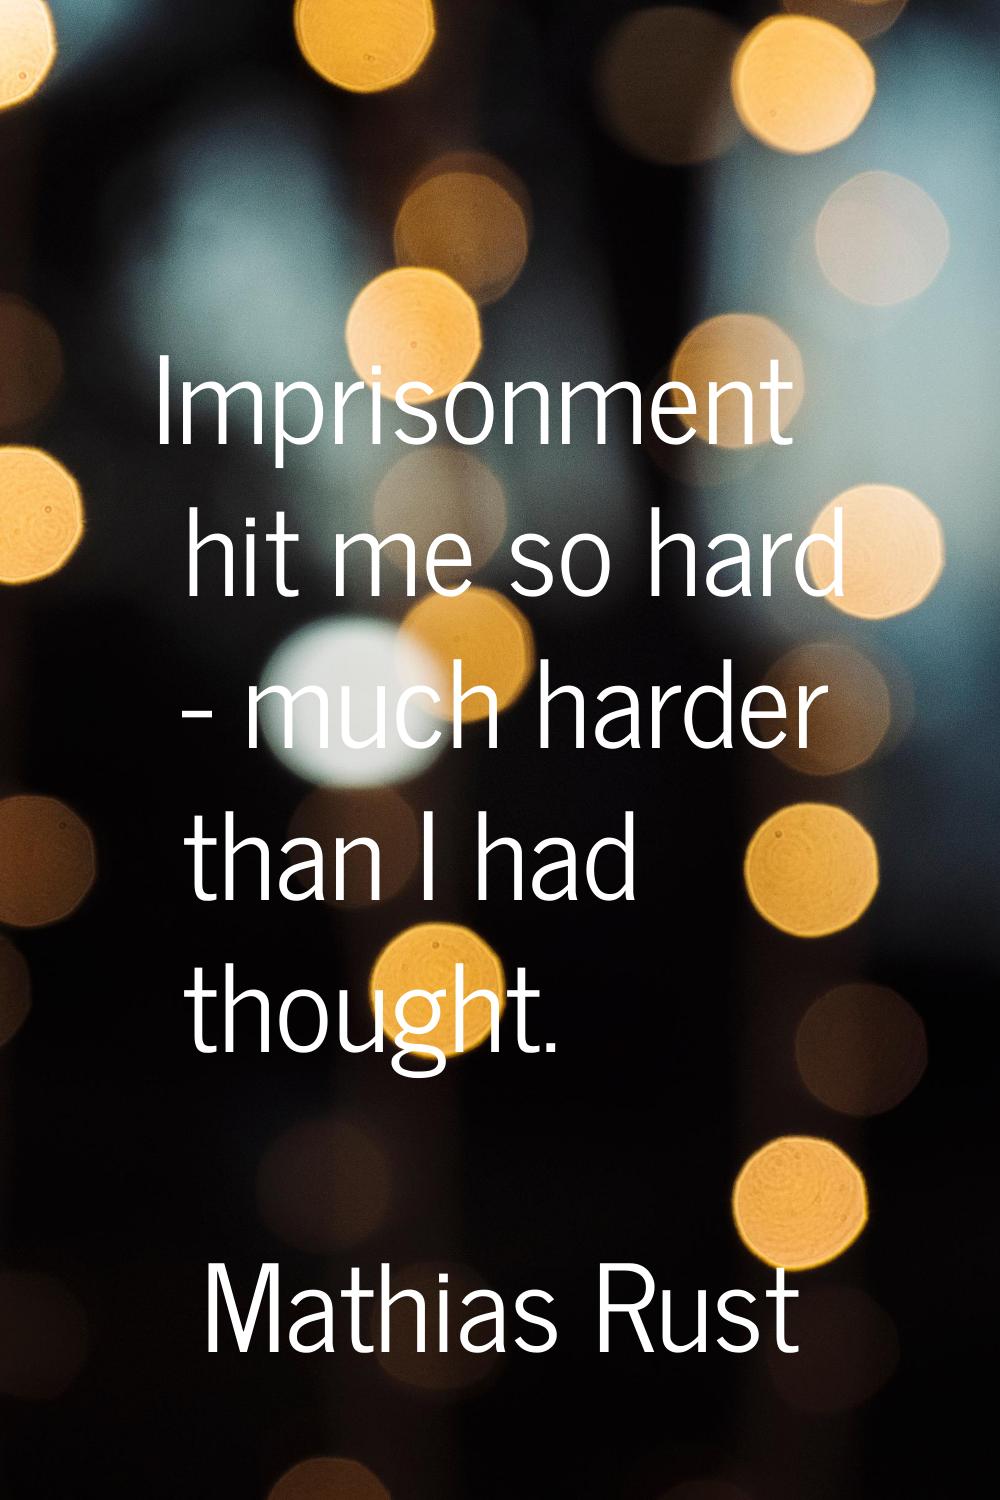 Imprisonment hit me so hard - much harder than I had thought.